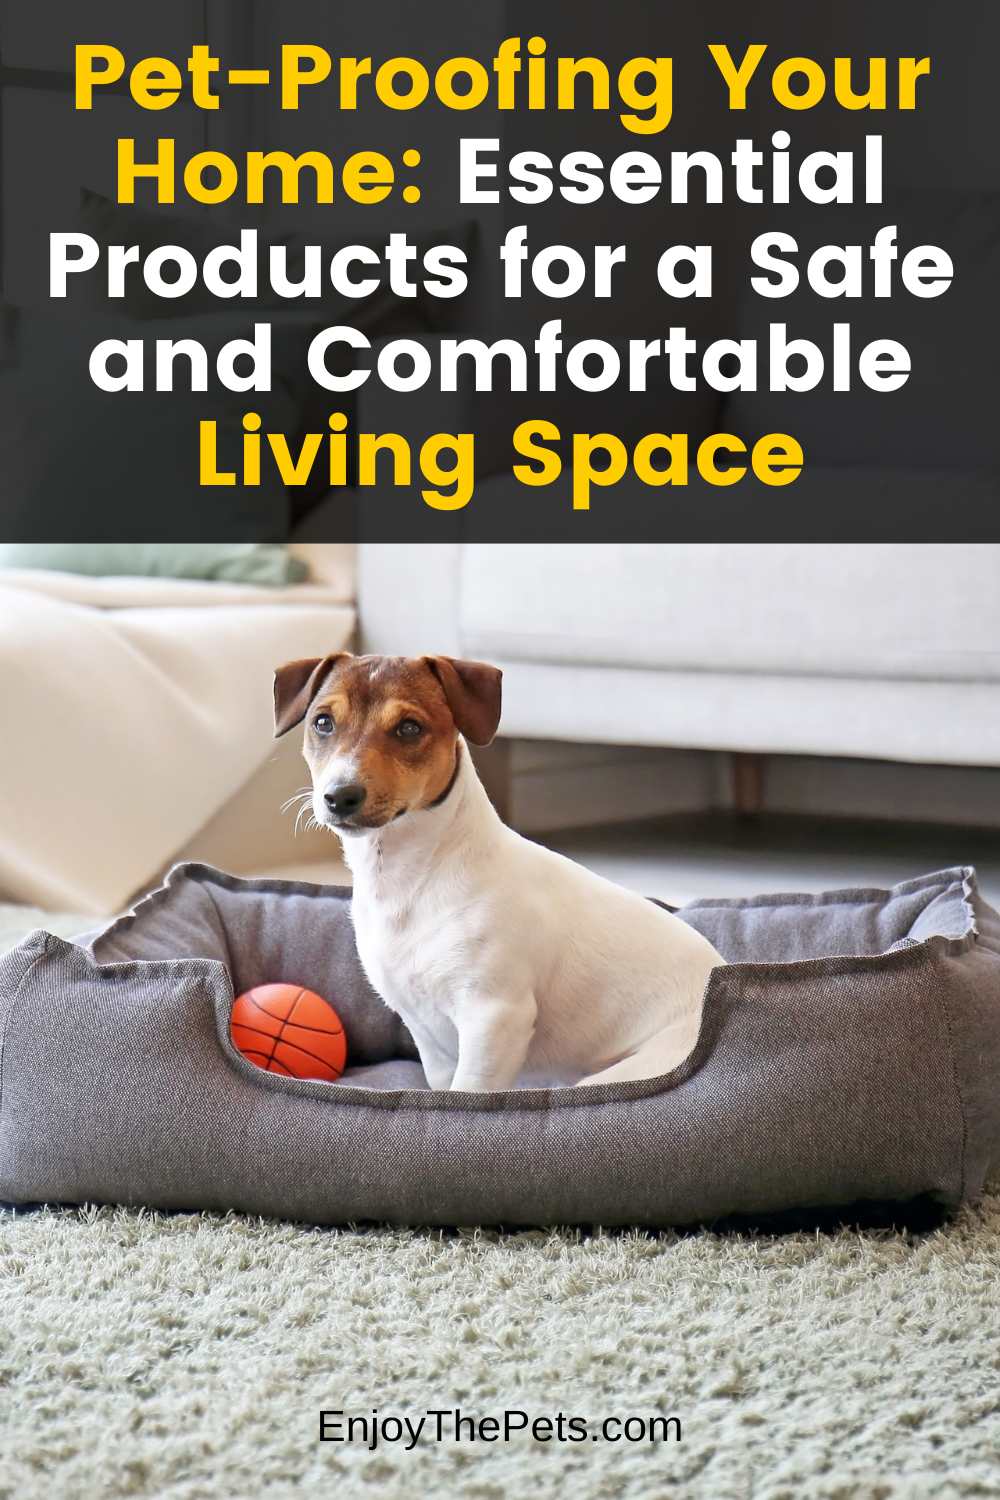 Pet-Proofing Your Home Essential Products for a Safe and Comfortable Living Space